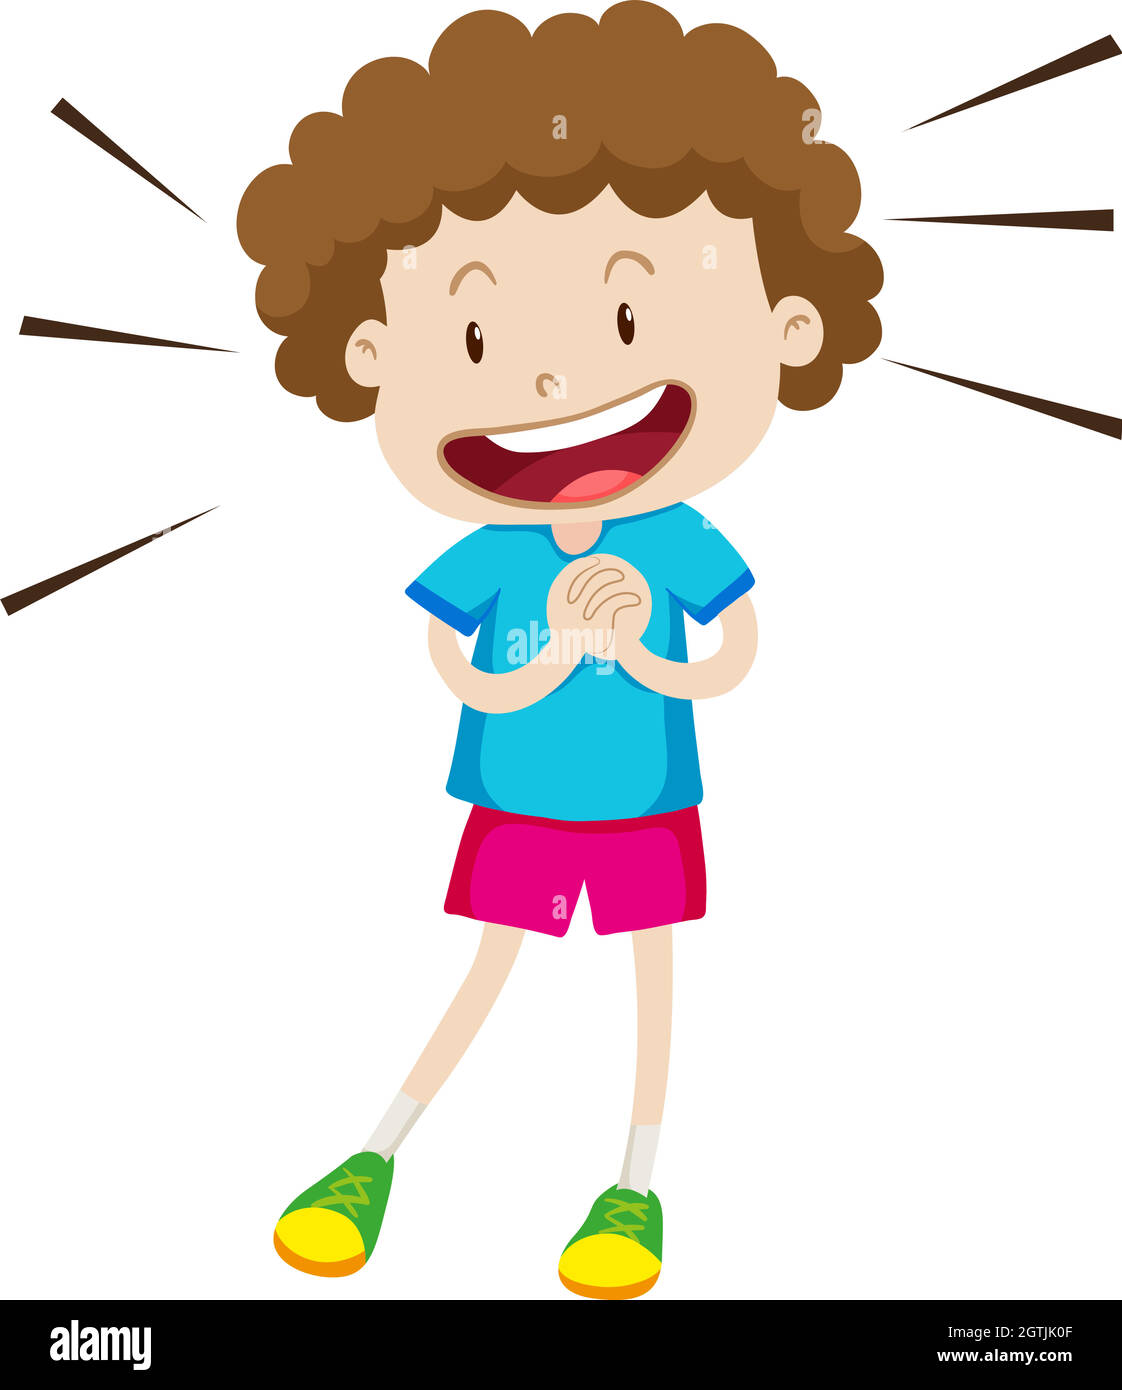 Little boy with curly hair Stock Vector